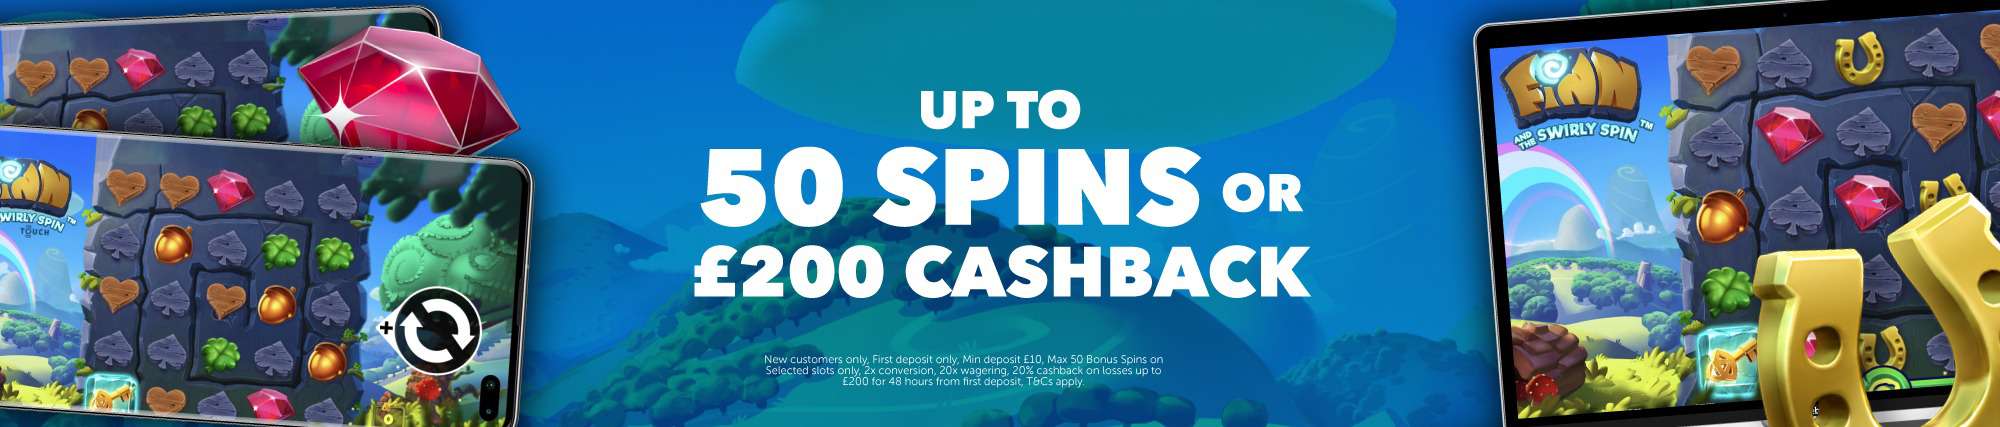 Sunset Spins Offers